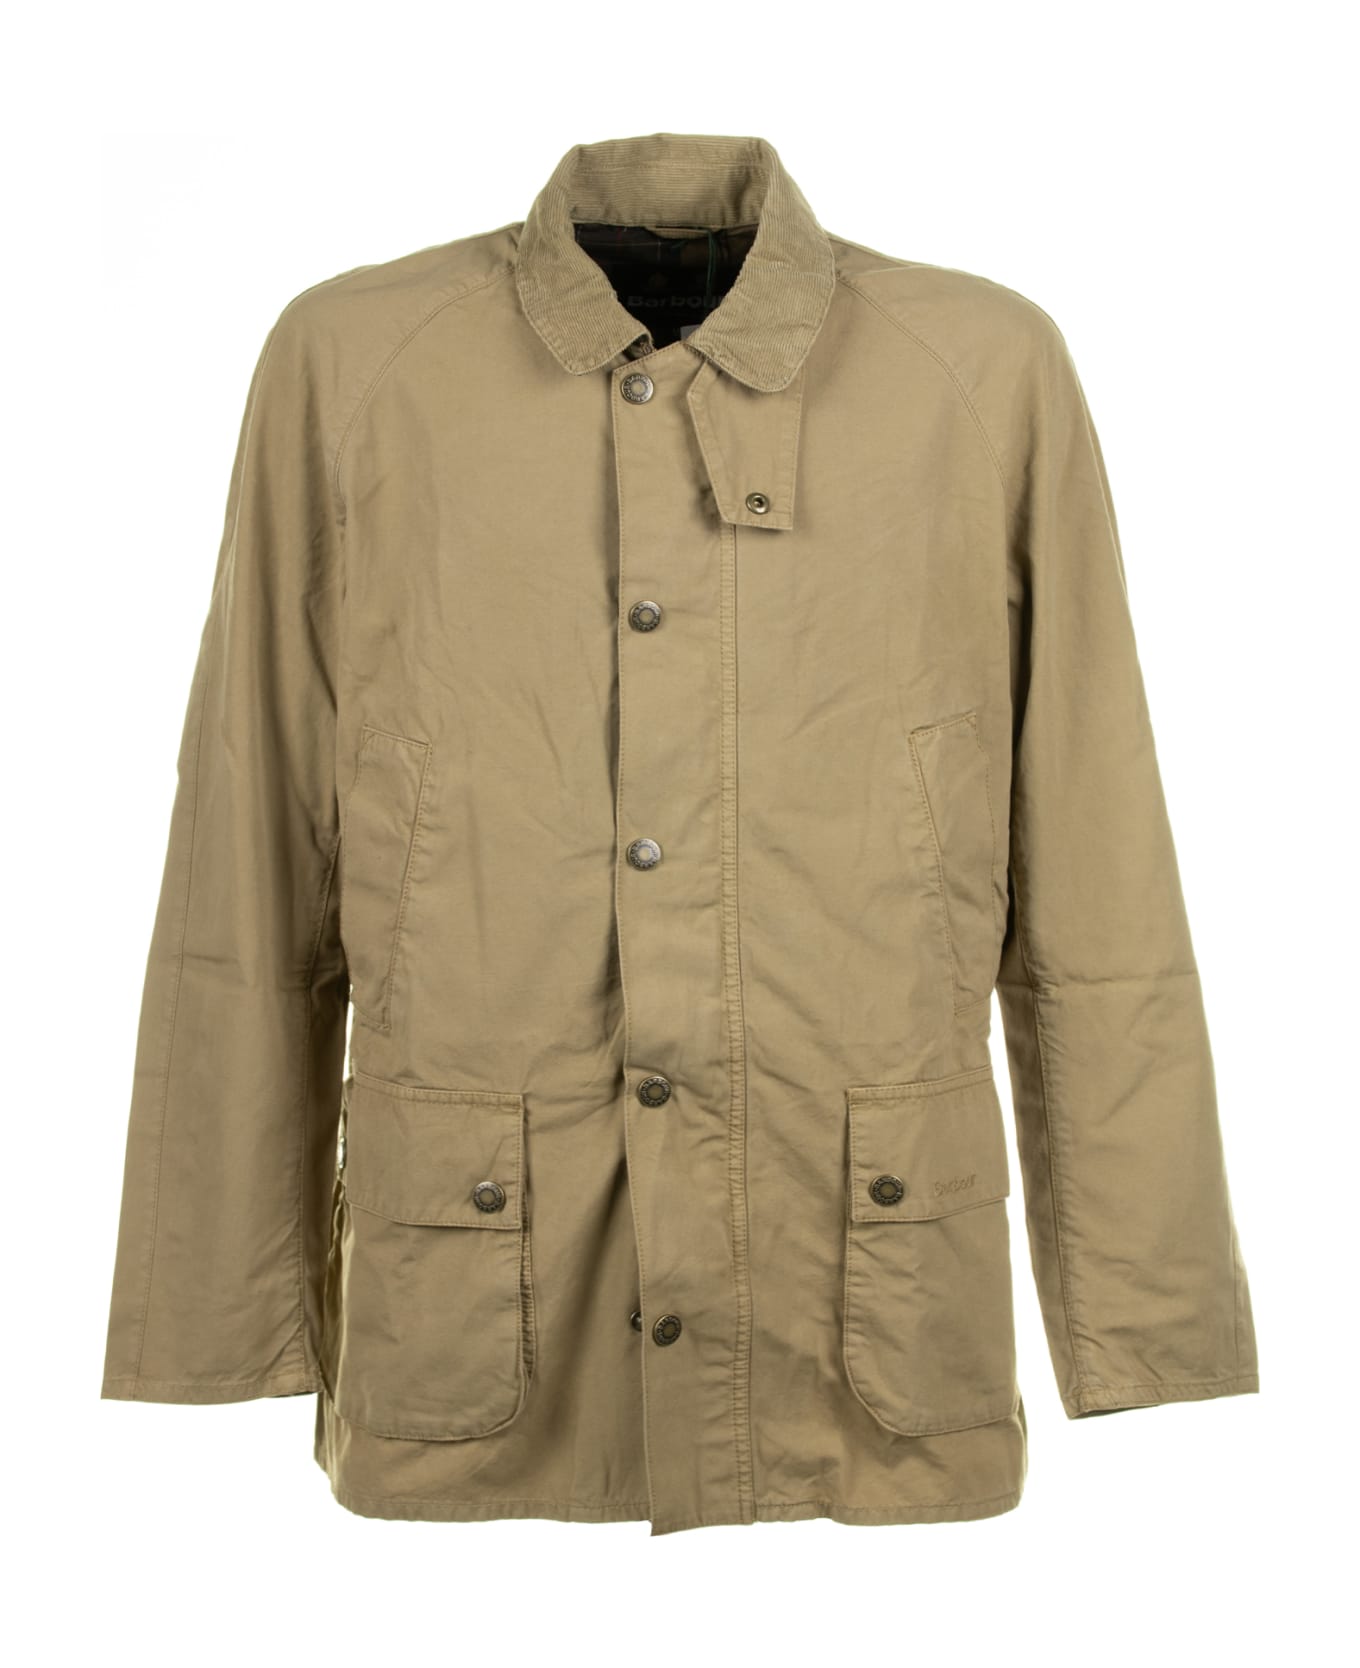 Barbour Cotton Jacket With Pockets And Buttons - STONE